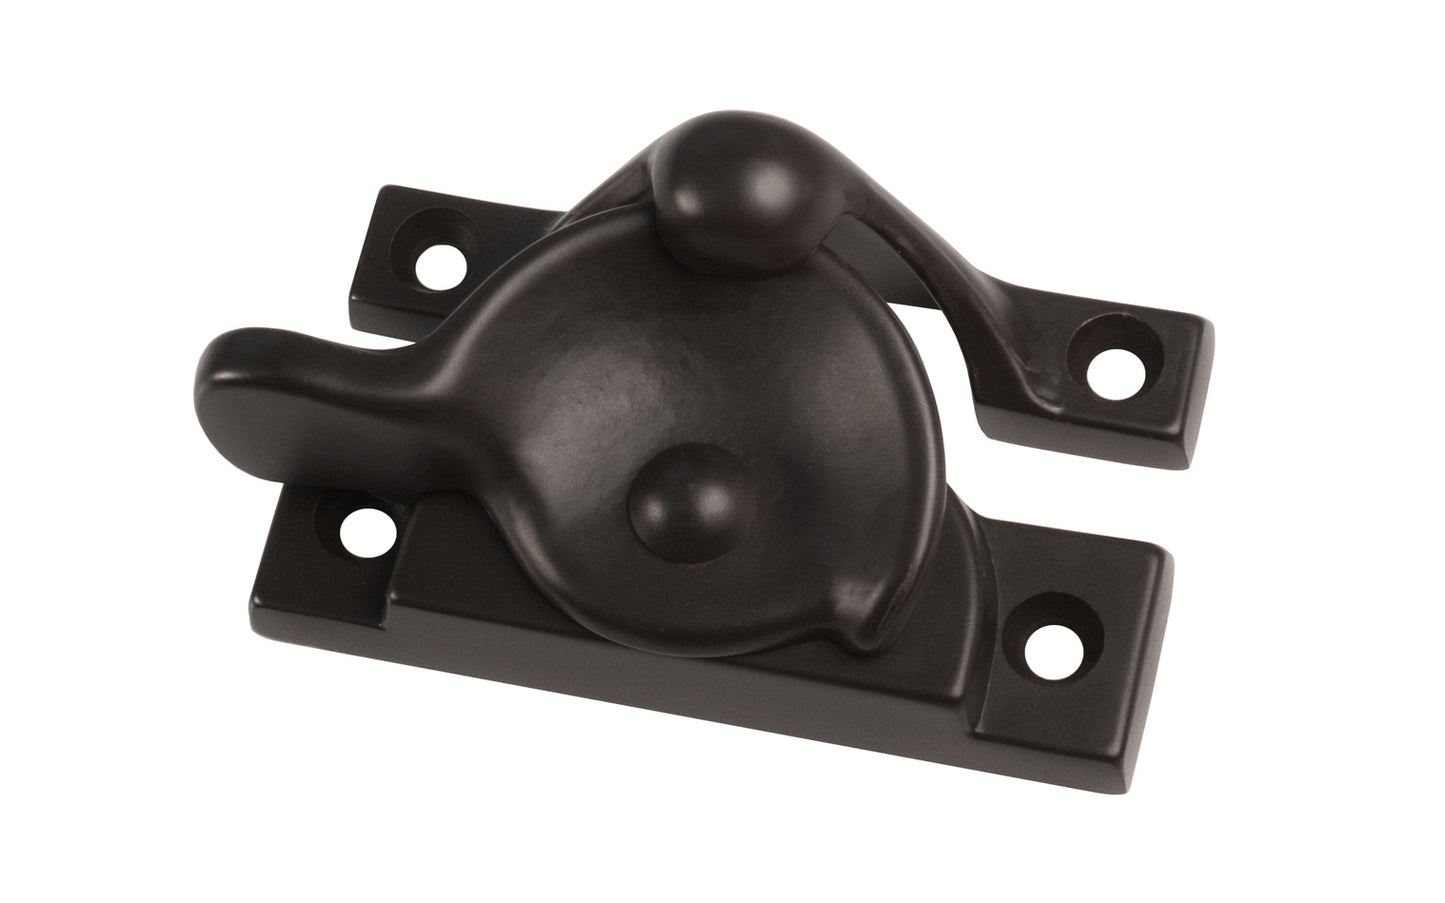 High quality classic solid brass crescent-style sash lock with square corners designed for hung or sash windows. Solid brass material with a durable pivot turn. 2-1/2" x 1" Size Lock. Oil Rubbed Bronze Finish.